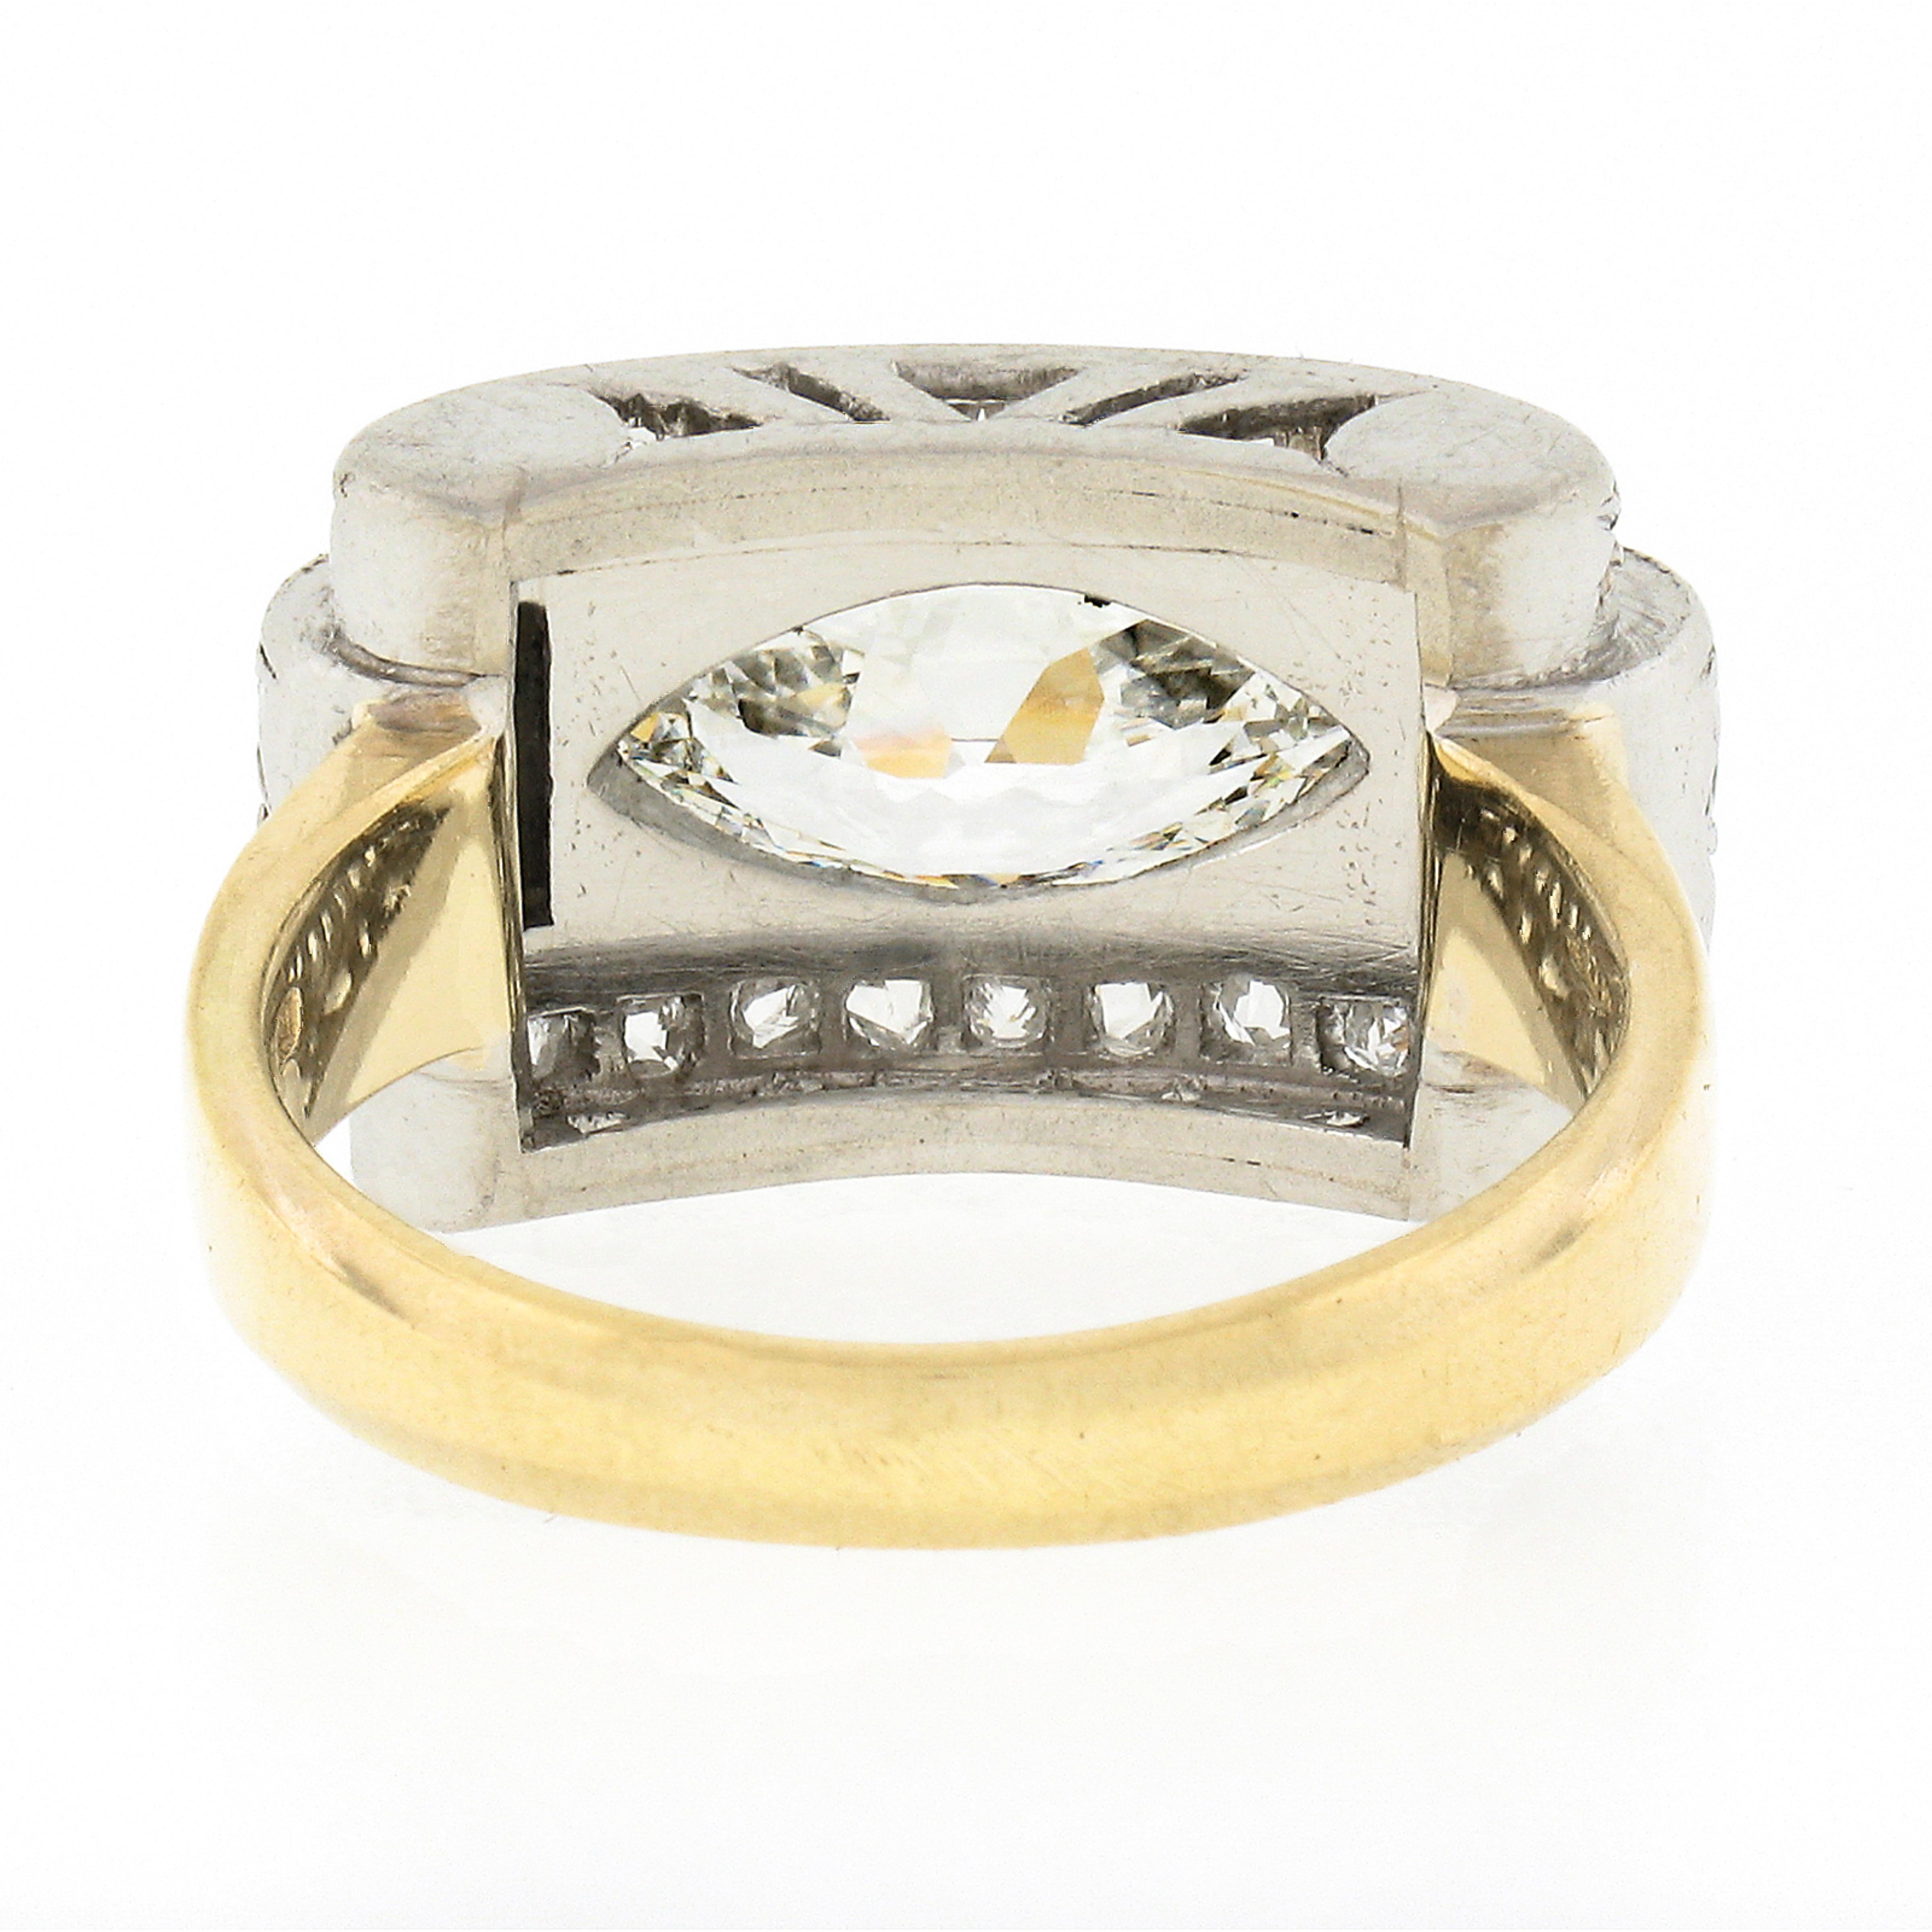 Antique Edwardian 18k Gold & Plat 1.40ct GIA Oval Diamond & Accents Platter Ring For Sale 1